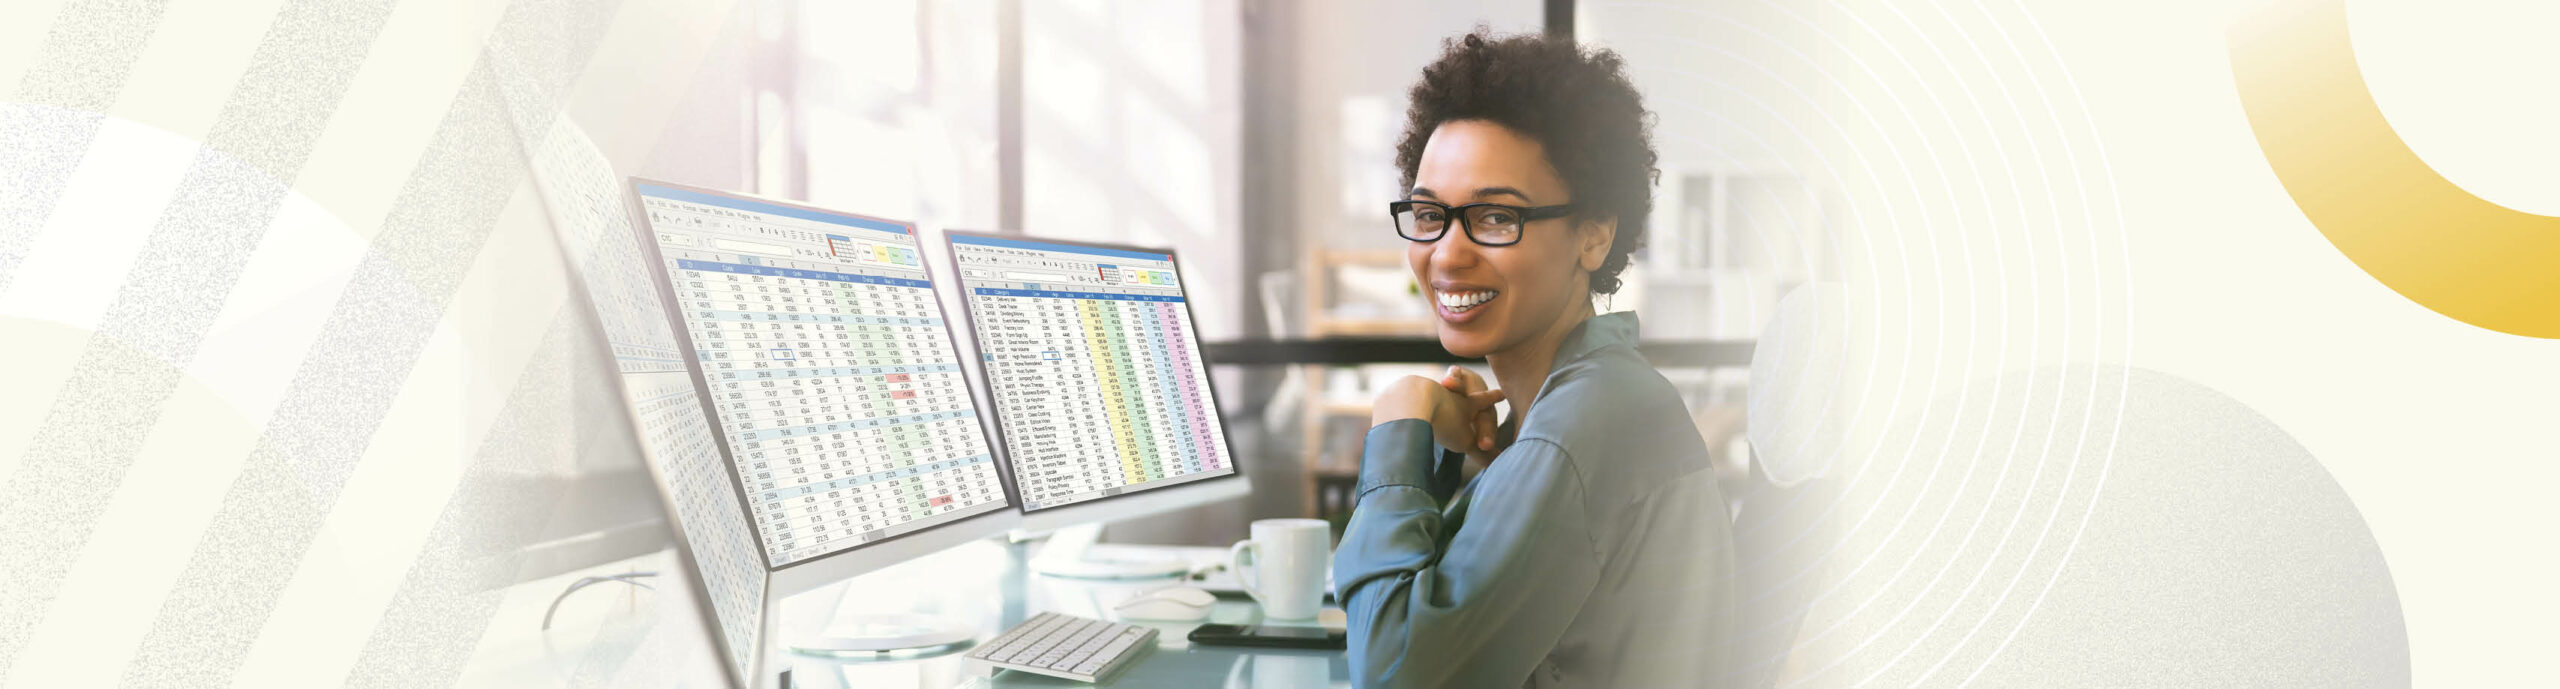 Image of a young African American business professional studying spreadsheets on her computer and smiling